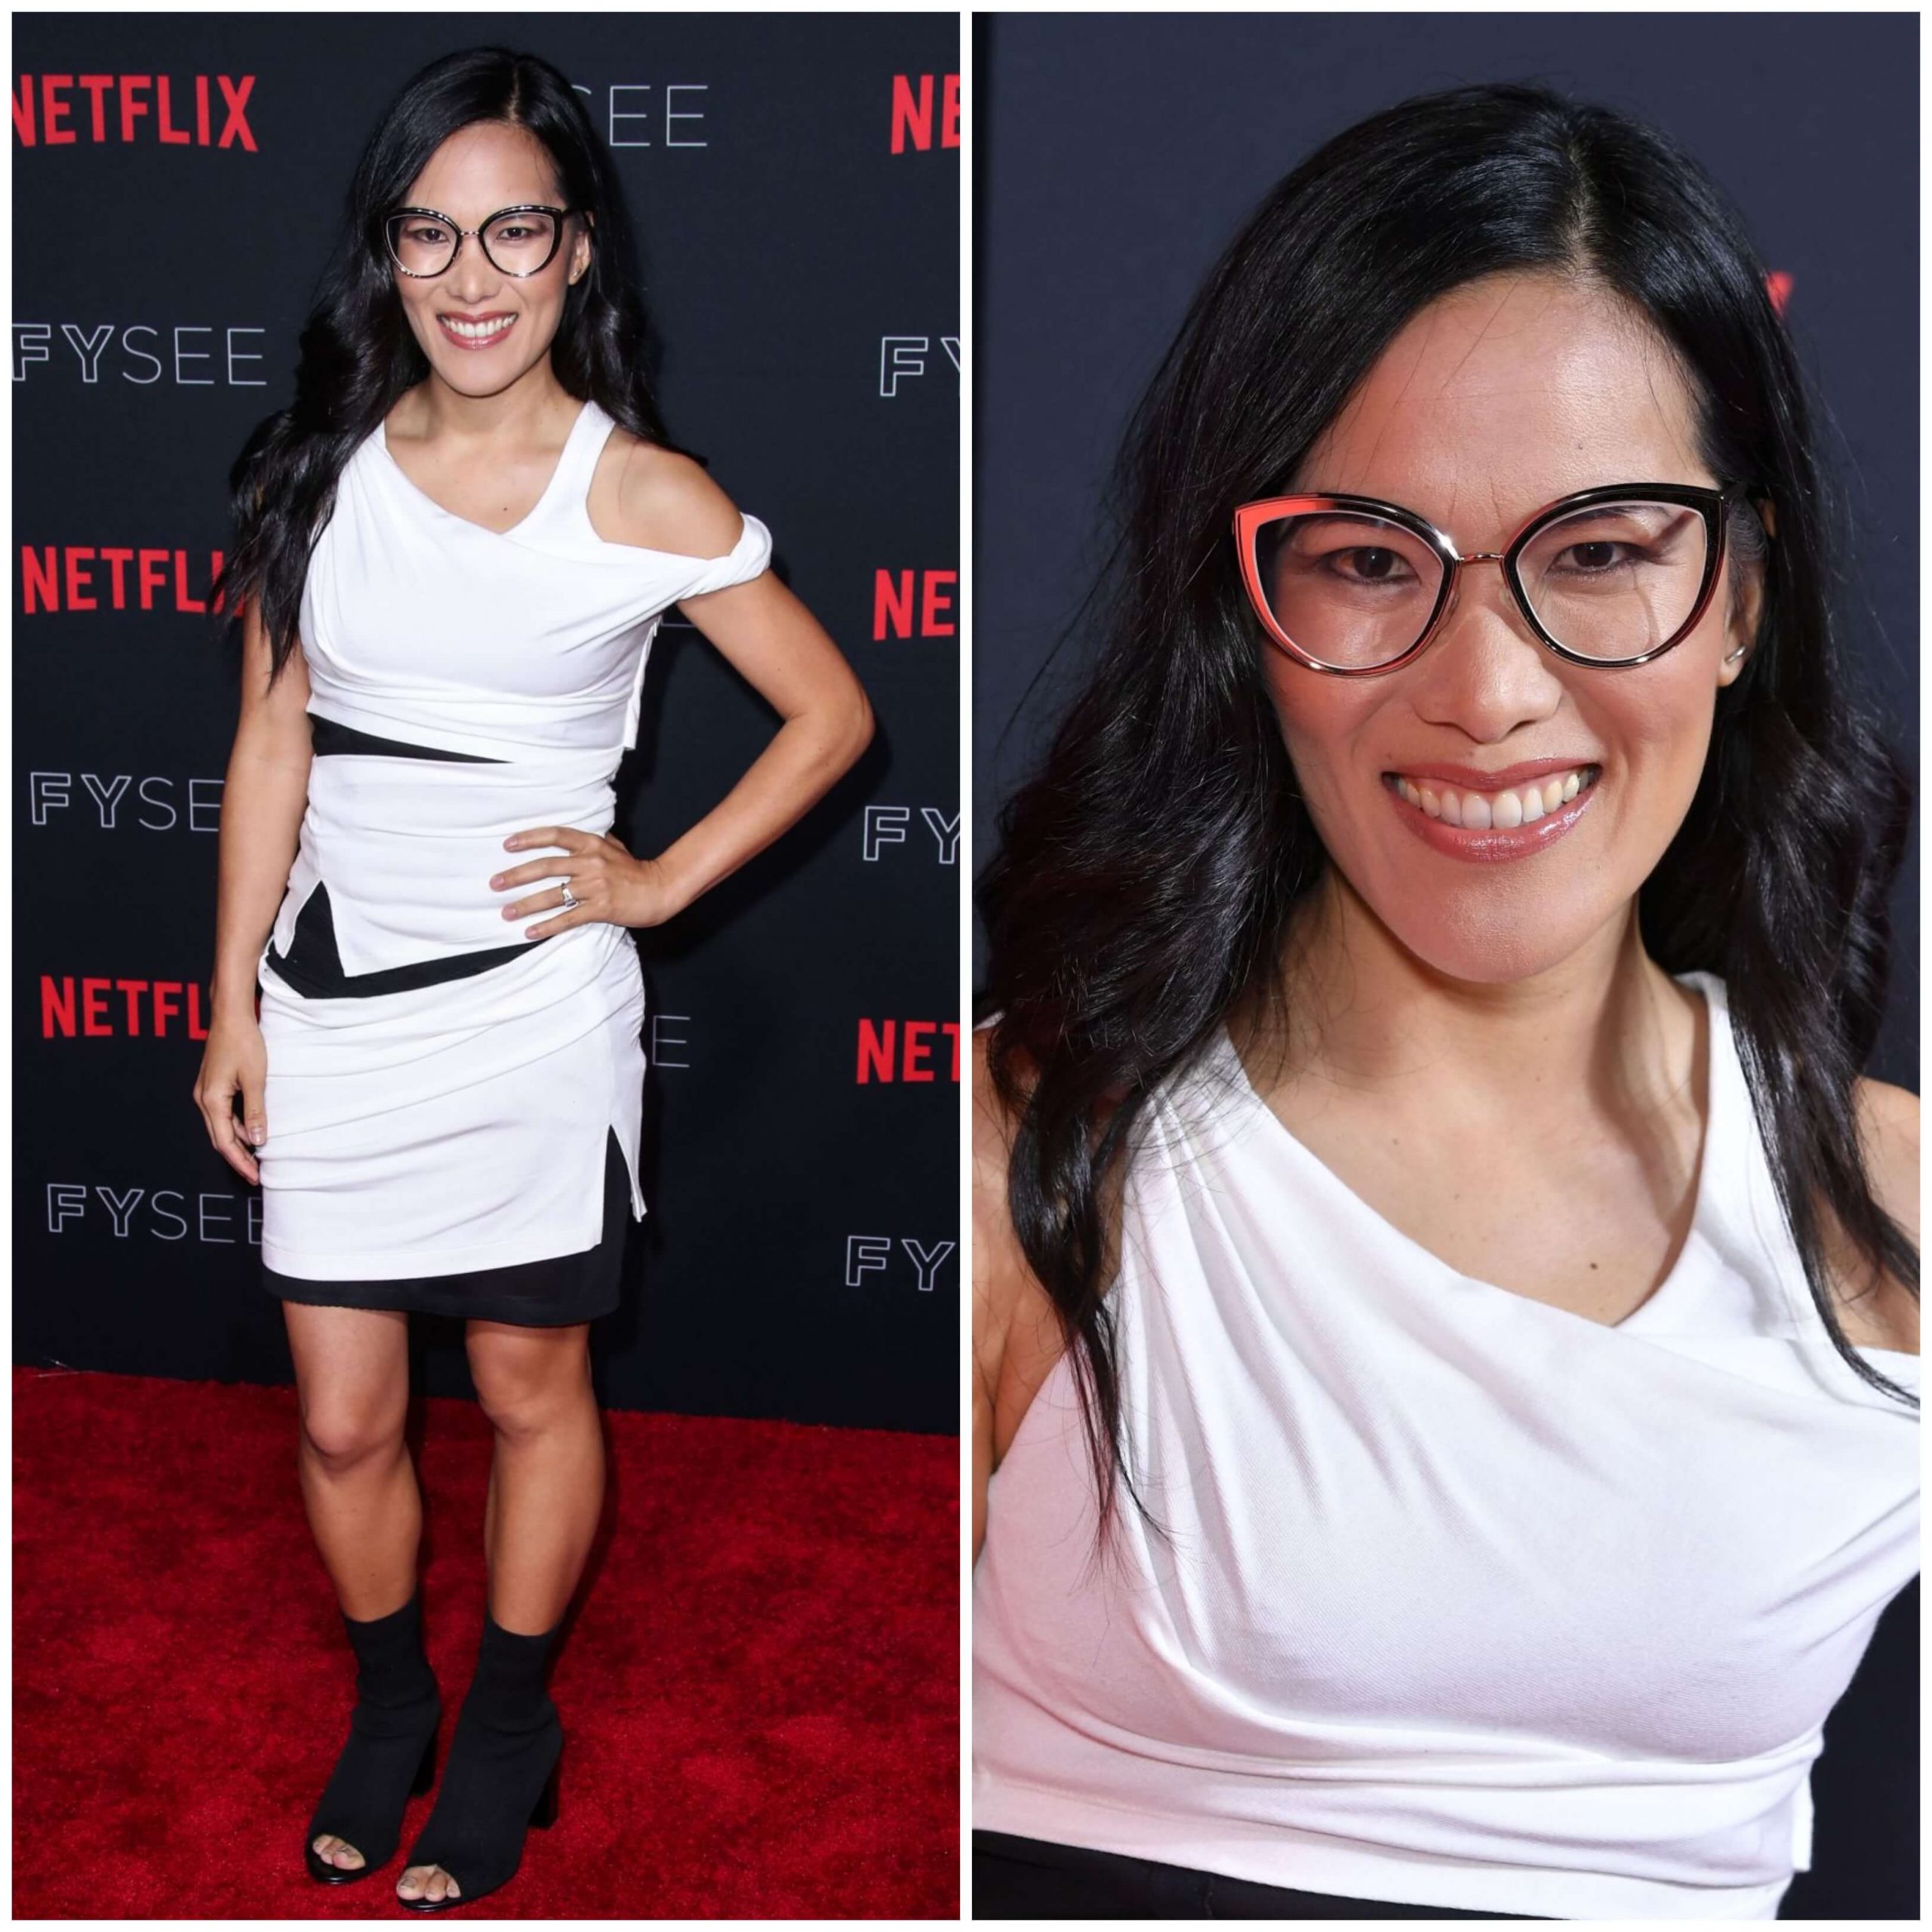 Ali Wong – In A White Cut-Out Short Dress -  Netflix FYSee Kick-Off Event in Los Angeles